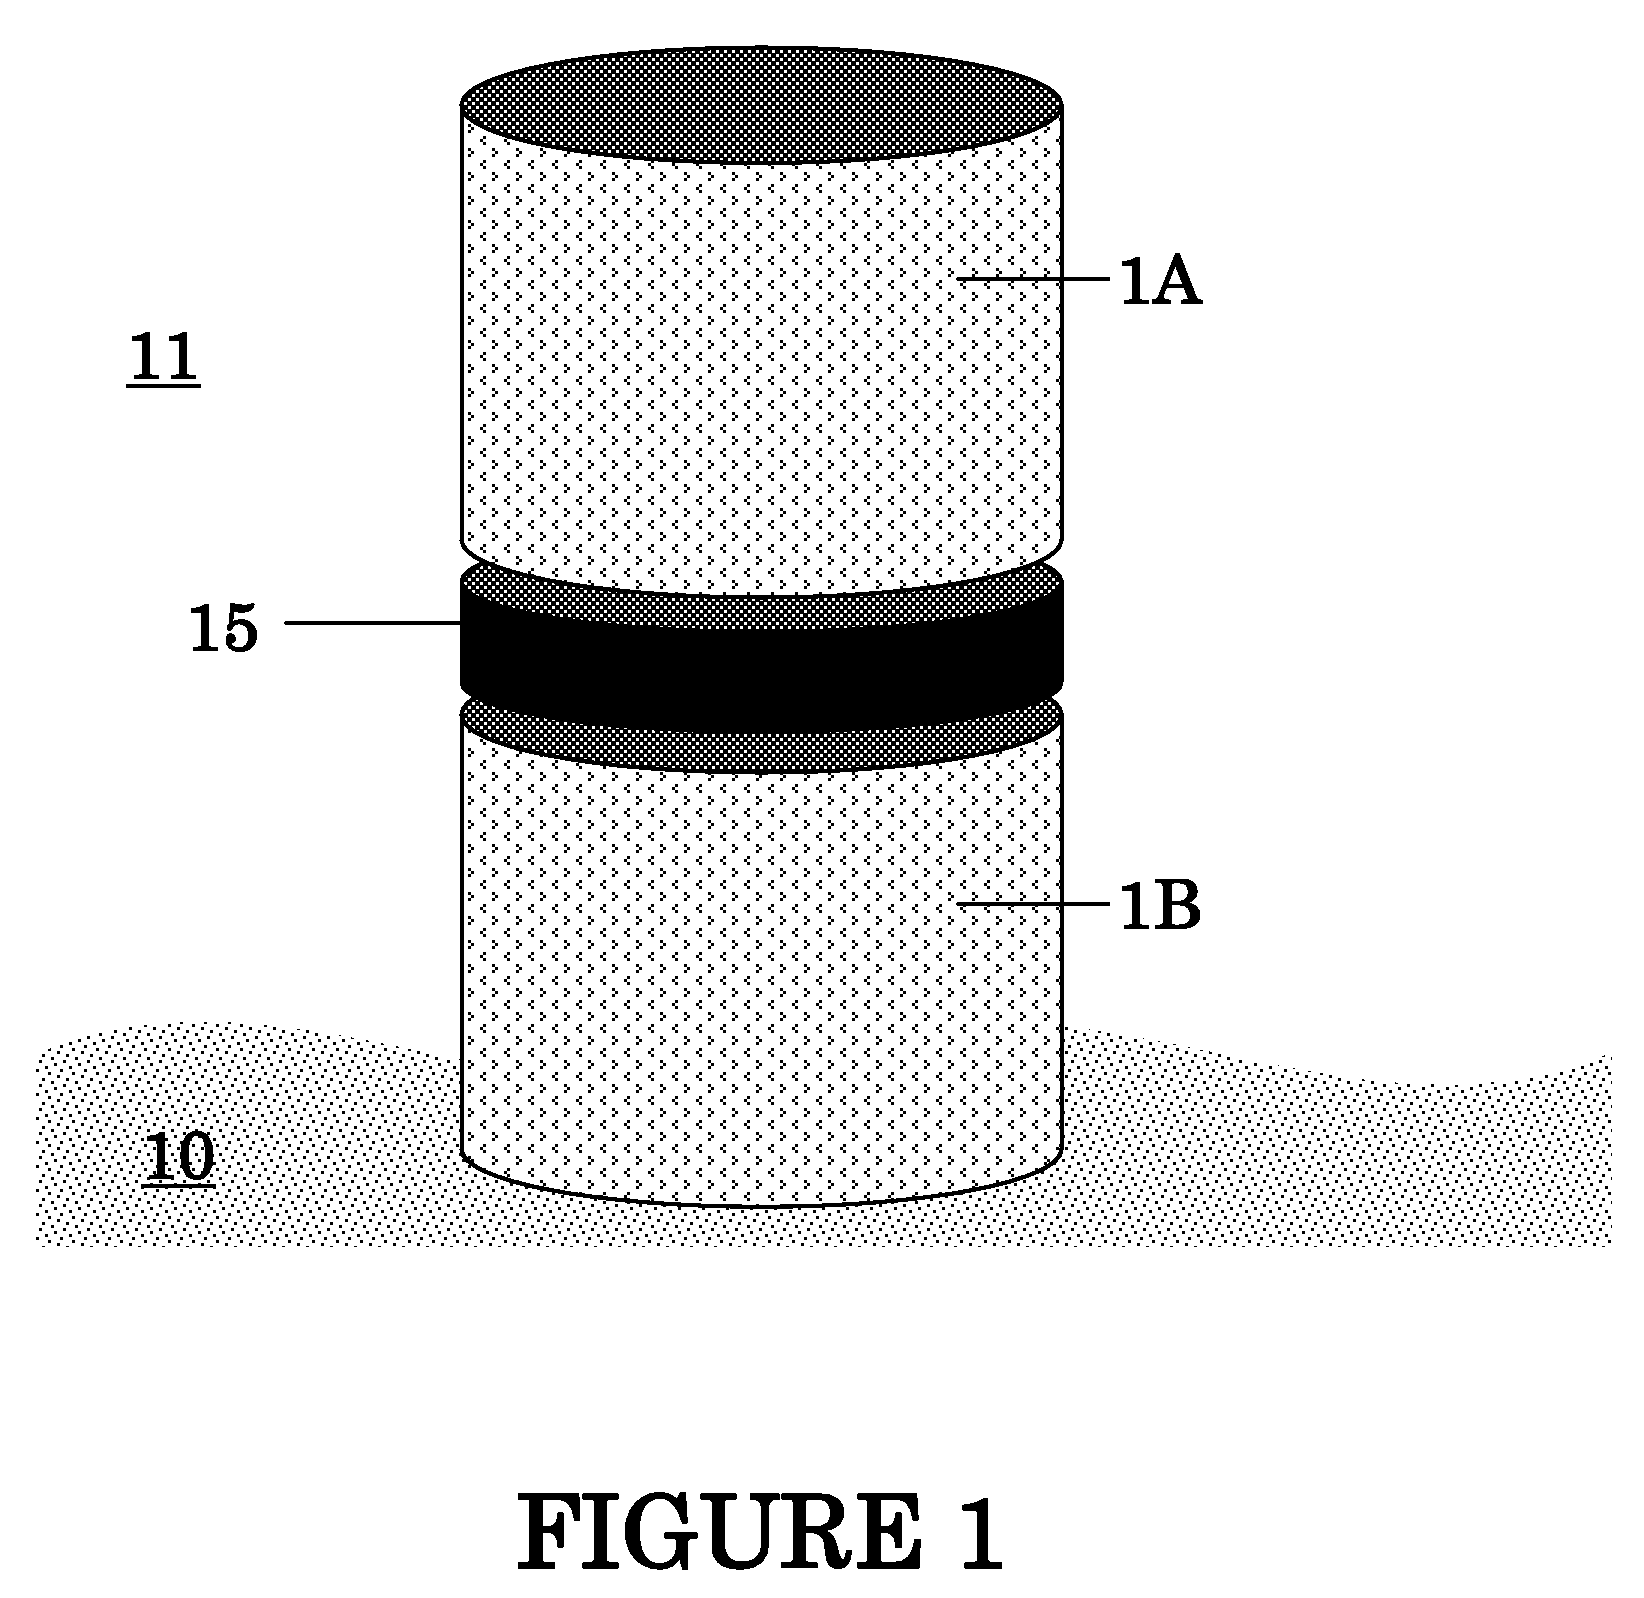 Geopolymer composition and application for carbon dioxide storage